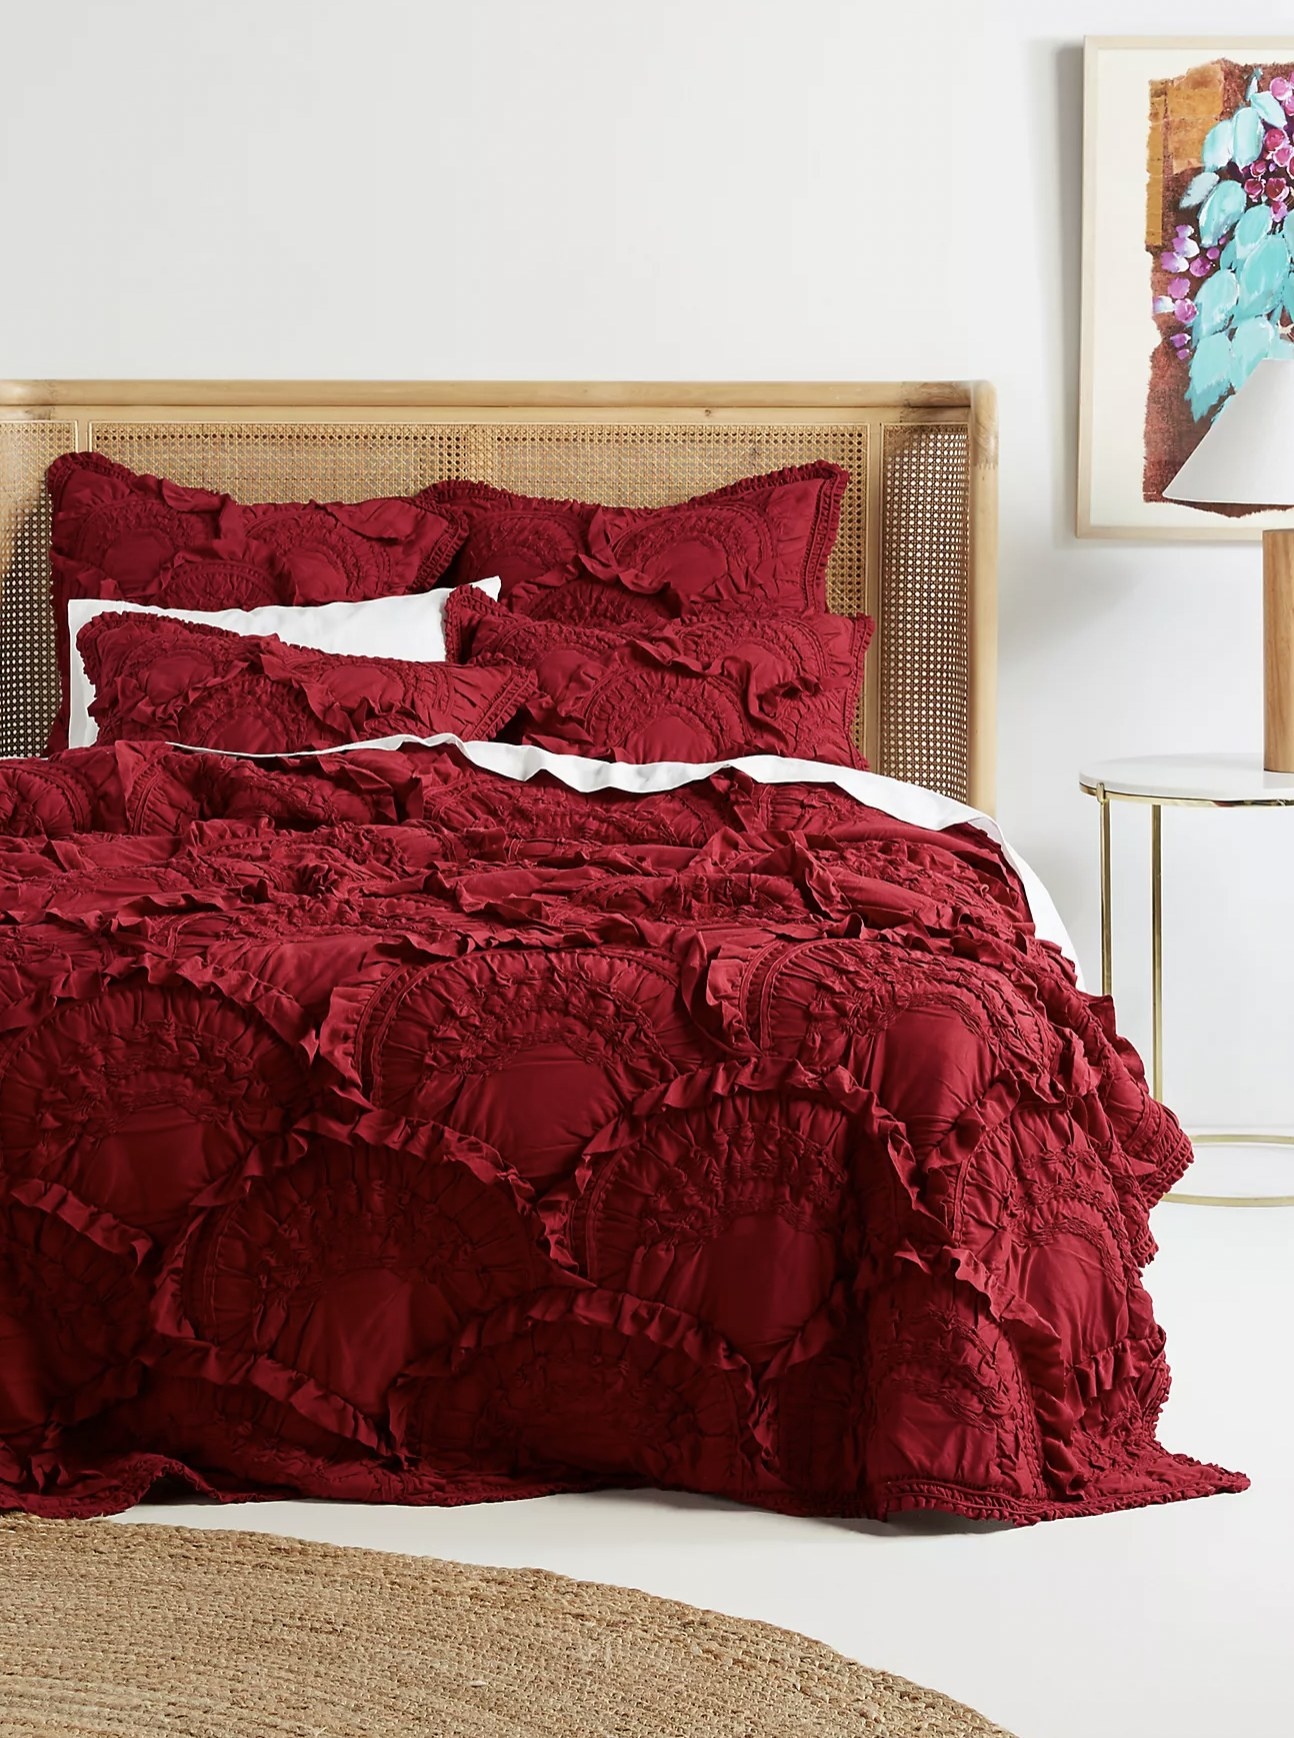 The red ruffle quilt